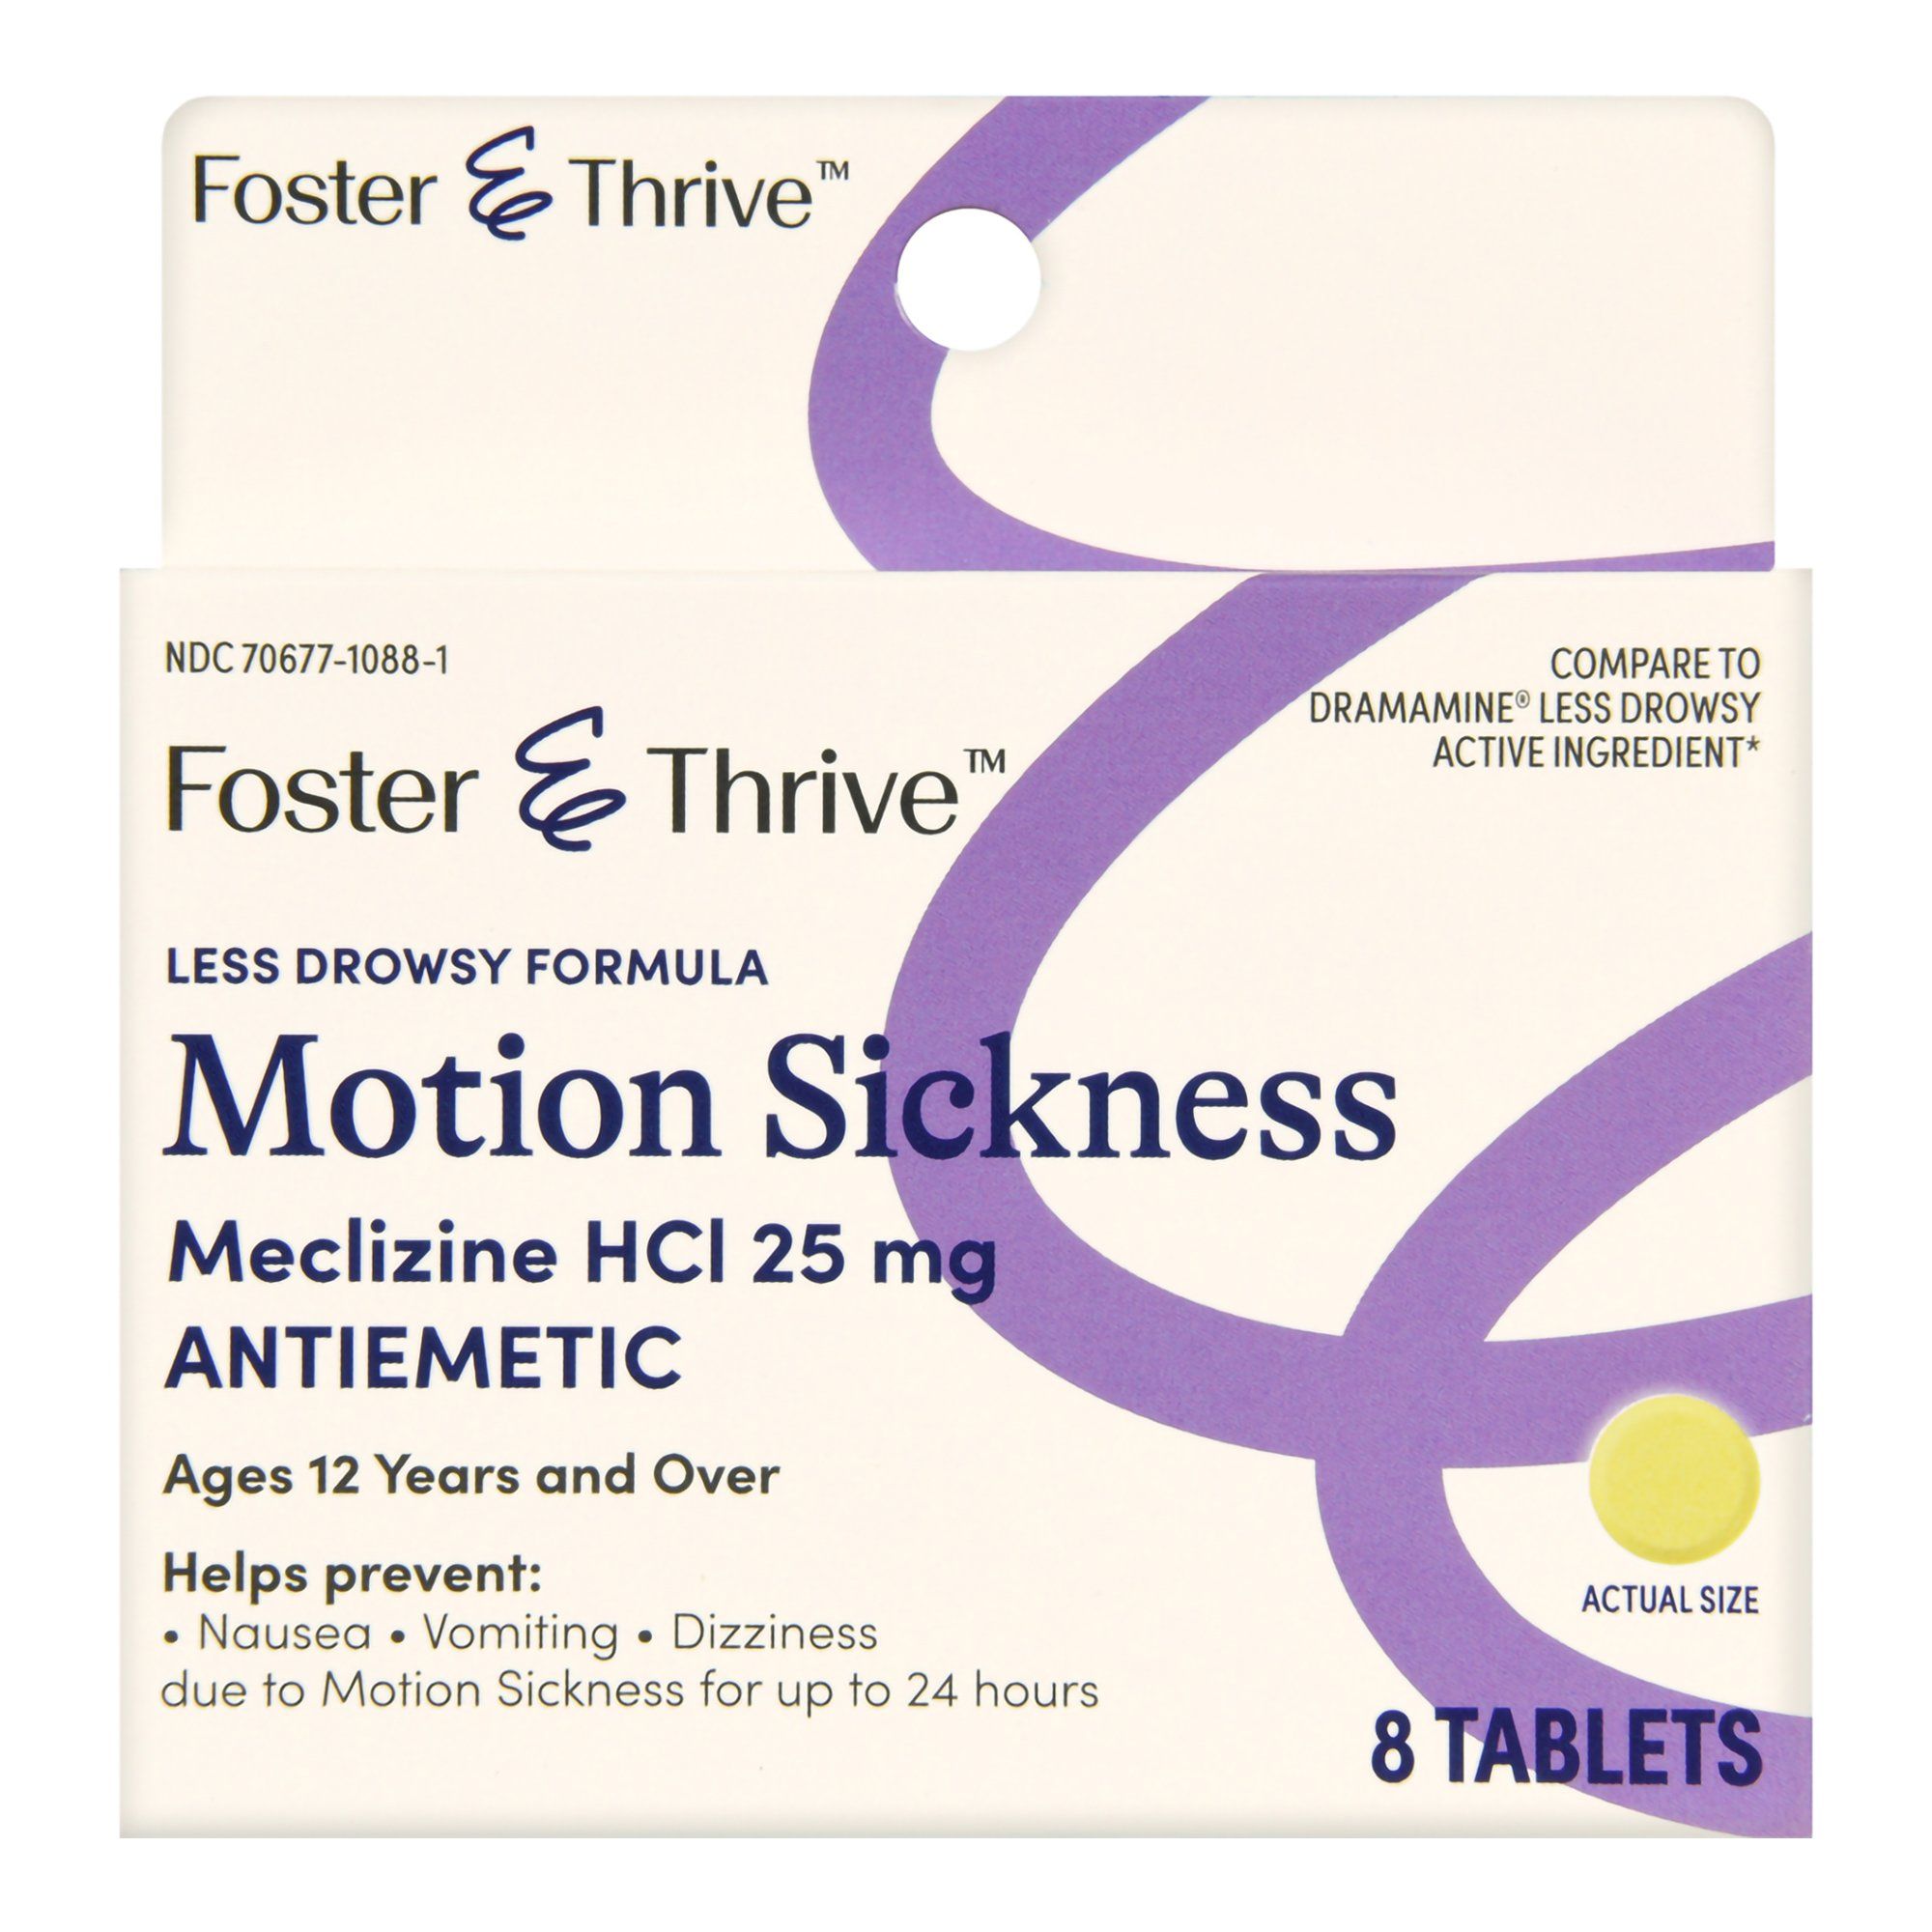 Foster & Thrive Motion Sickness Meclizine HCl Tablets, 25 mg - 8 ct